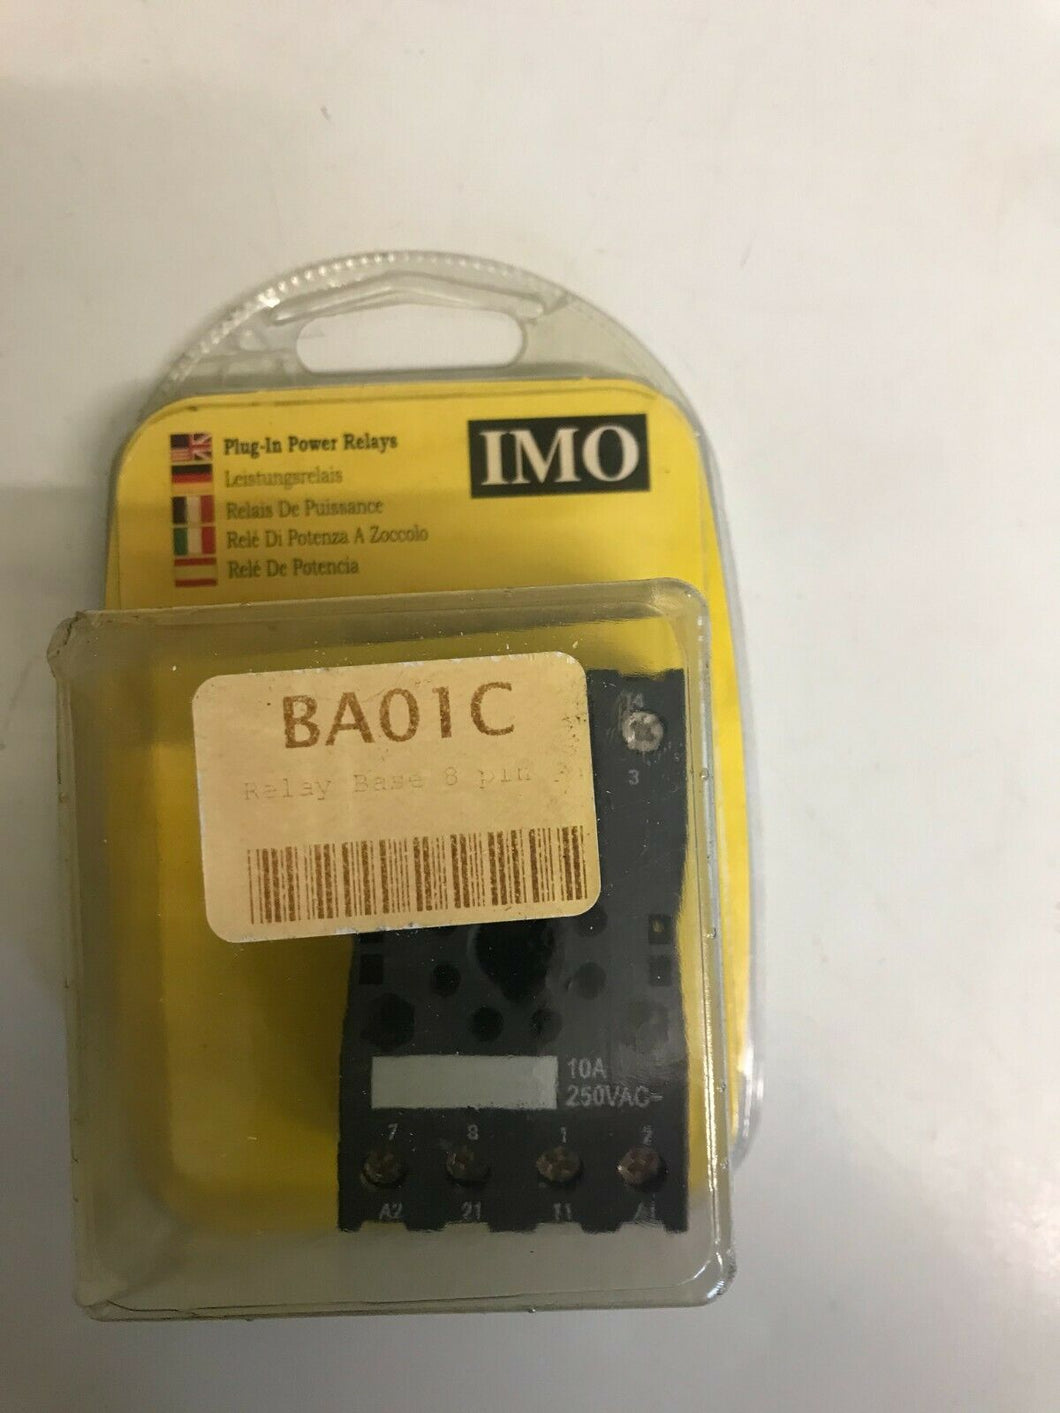 IMO BA01C 8 PIN RELAY BASE 10 AMP 250 VOLT DIN RAIL MOUNTED BASE ONLY